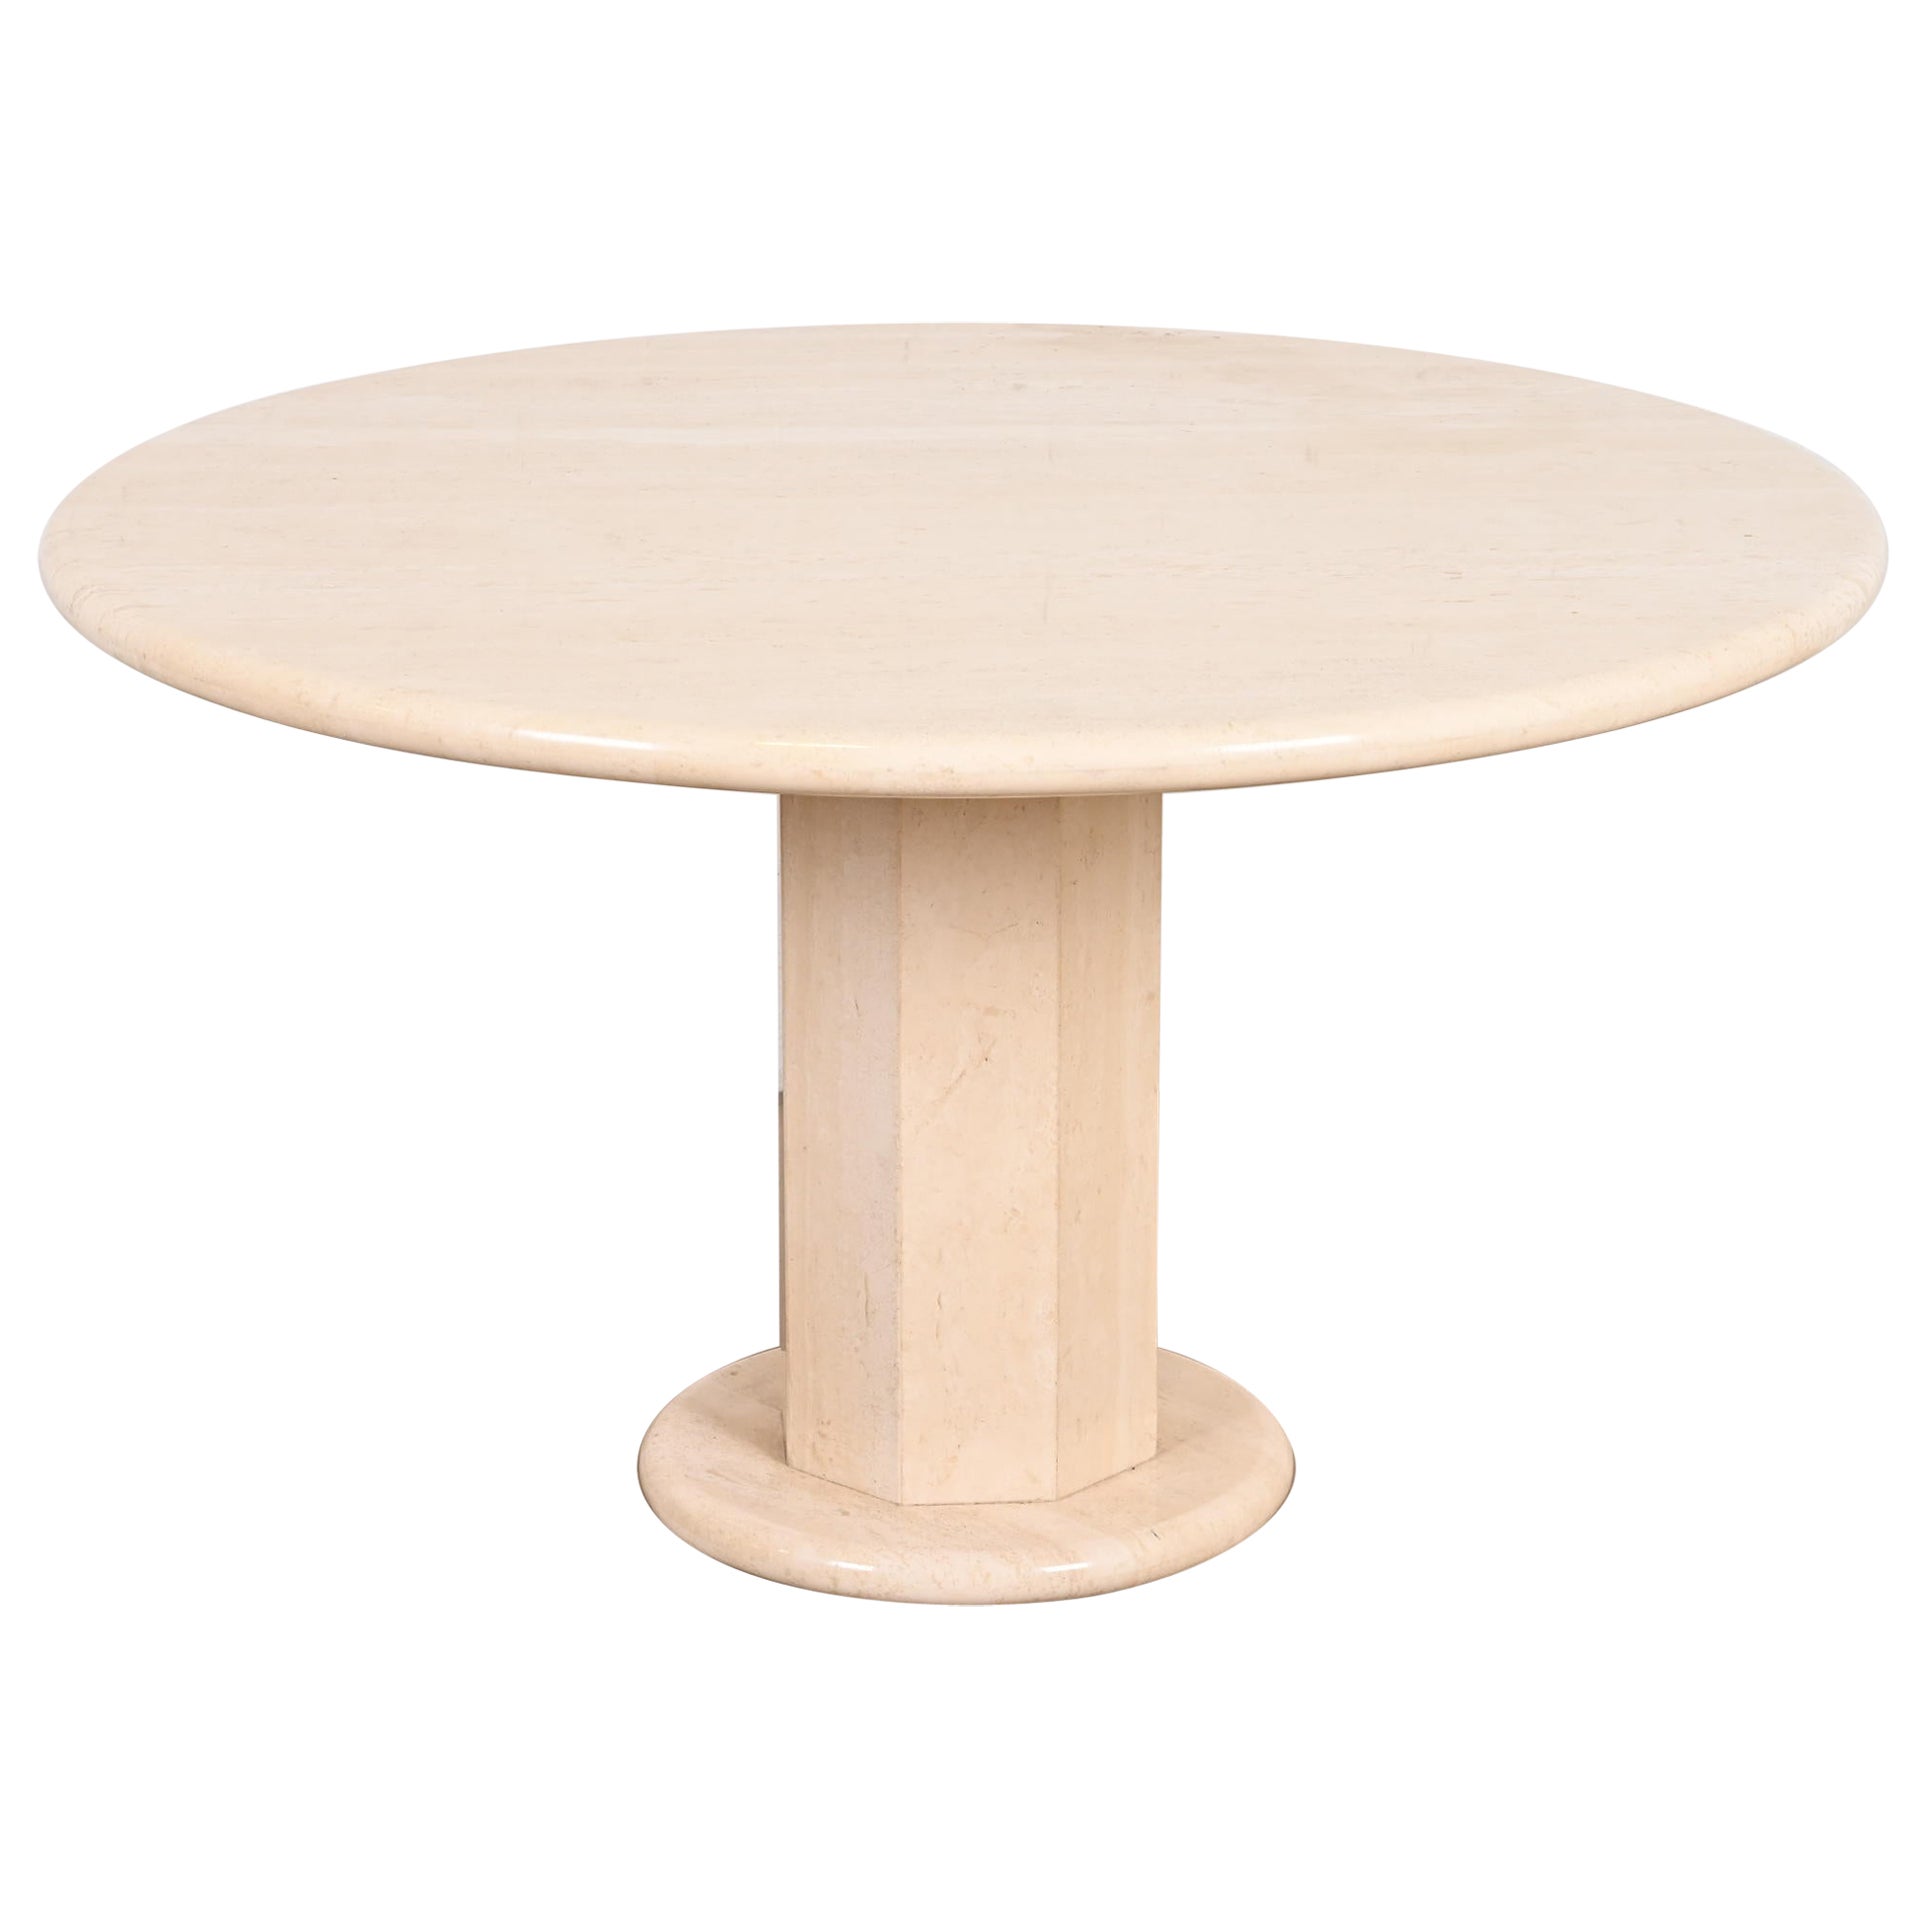 Modern Italian Travertine Round Pedestal Dining or Center Table by Ello, 1970s For Sale